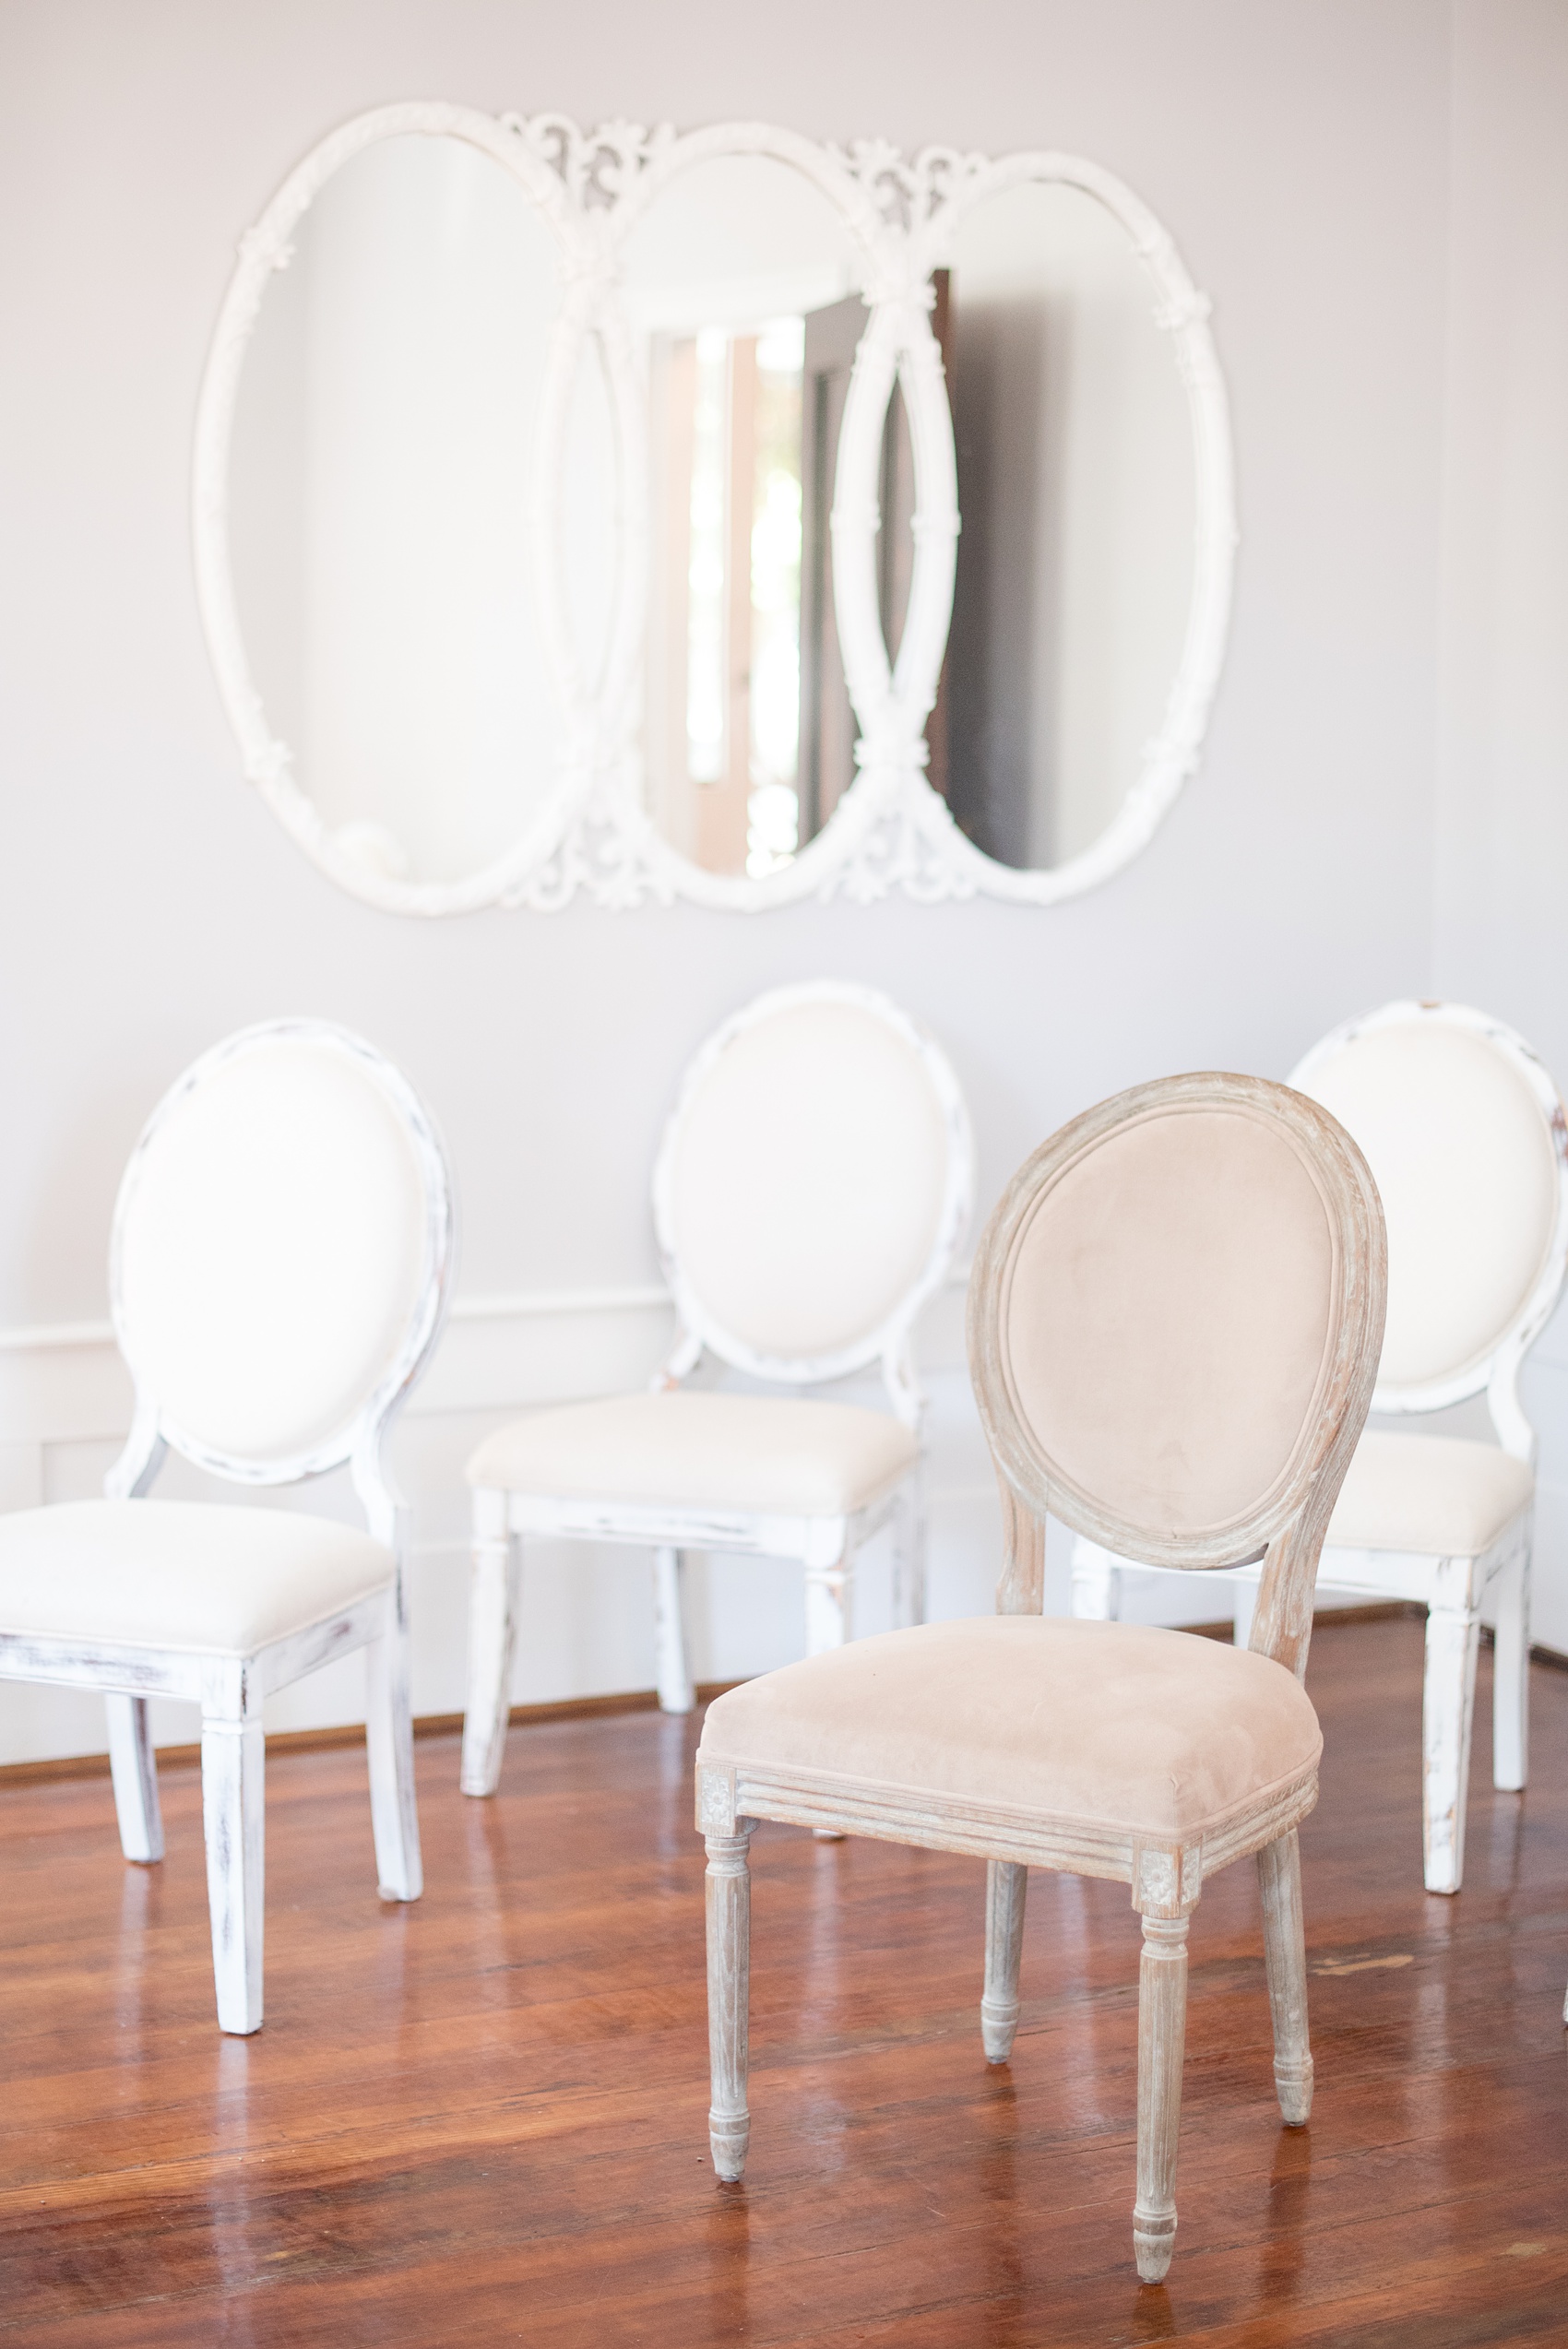 Mikkel Paige Photography pictures of a wedding at Leslie-Alford Mim's House in North Carolina for a Mad Dash Weddings event. Photo of decorative white cushioned chairs for an elopement inside the historic home.